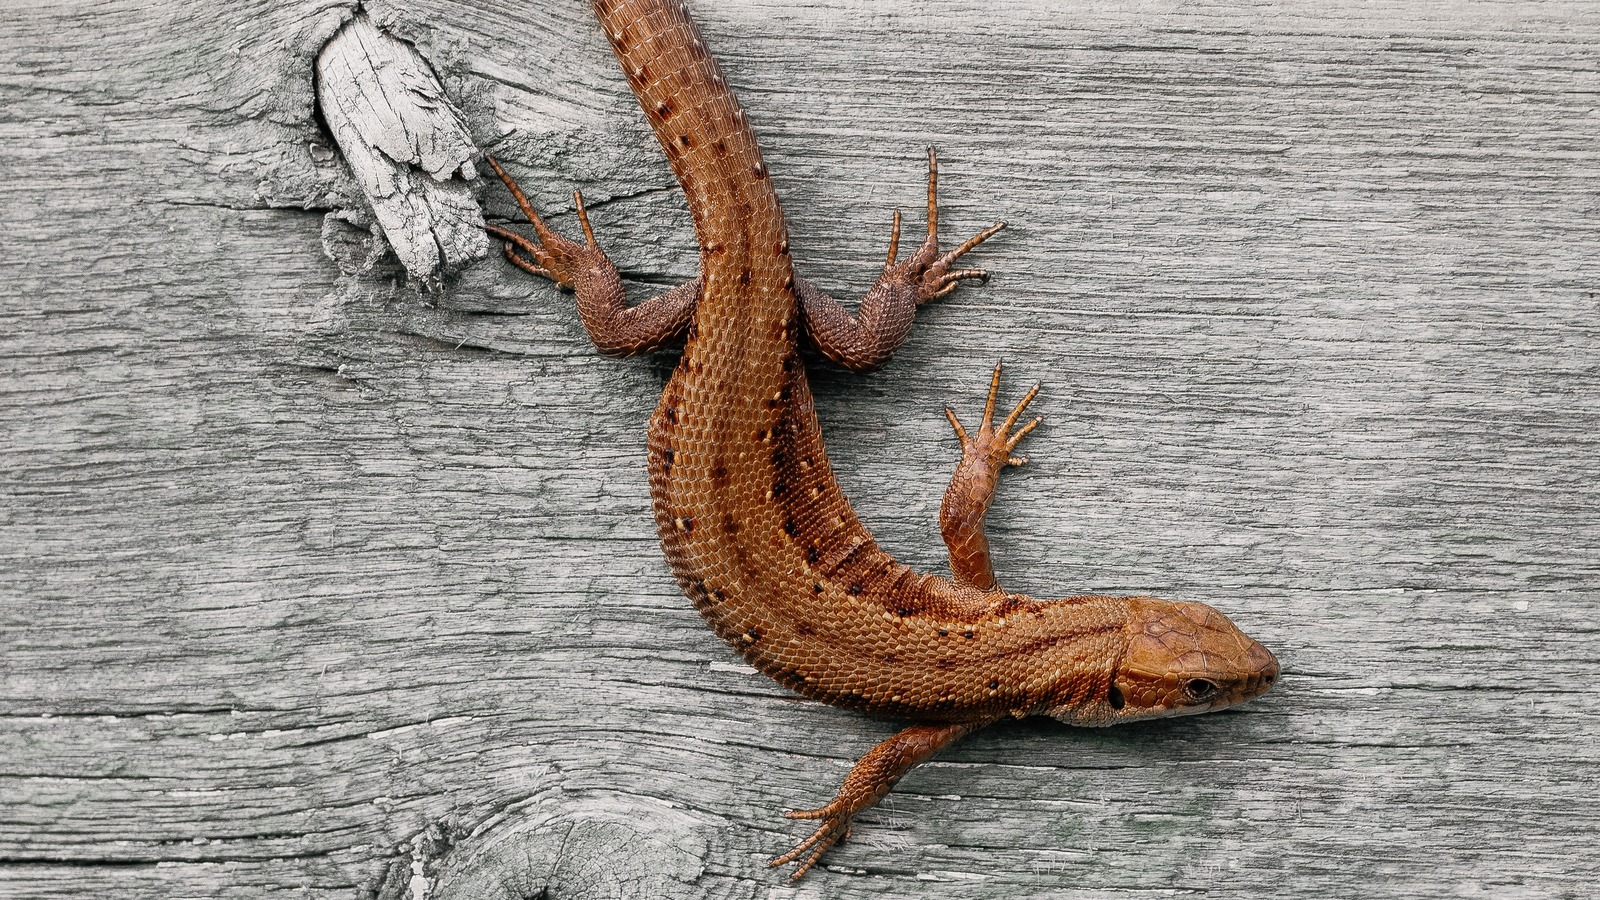 5 Humane Ways To Get Rid Of Lizards In Your Home